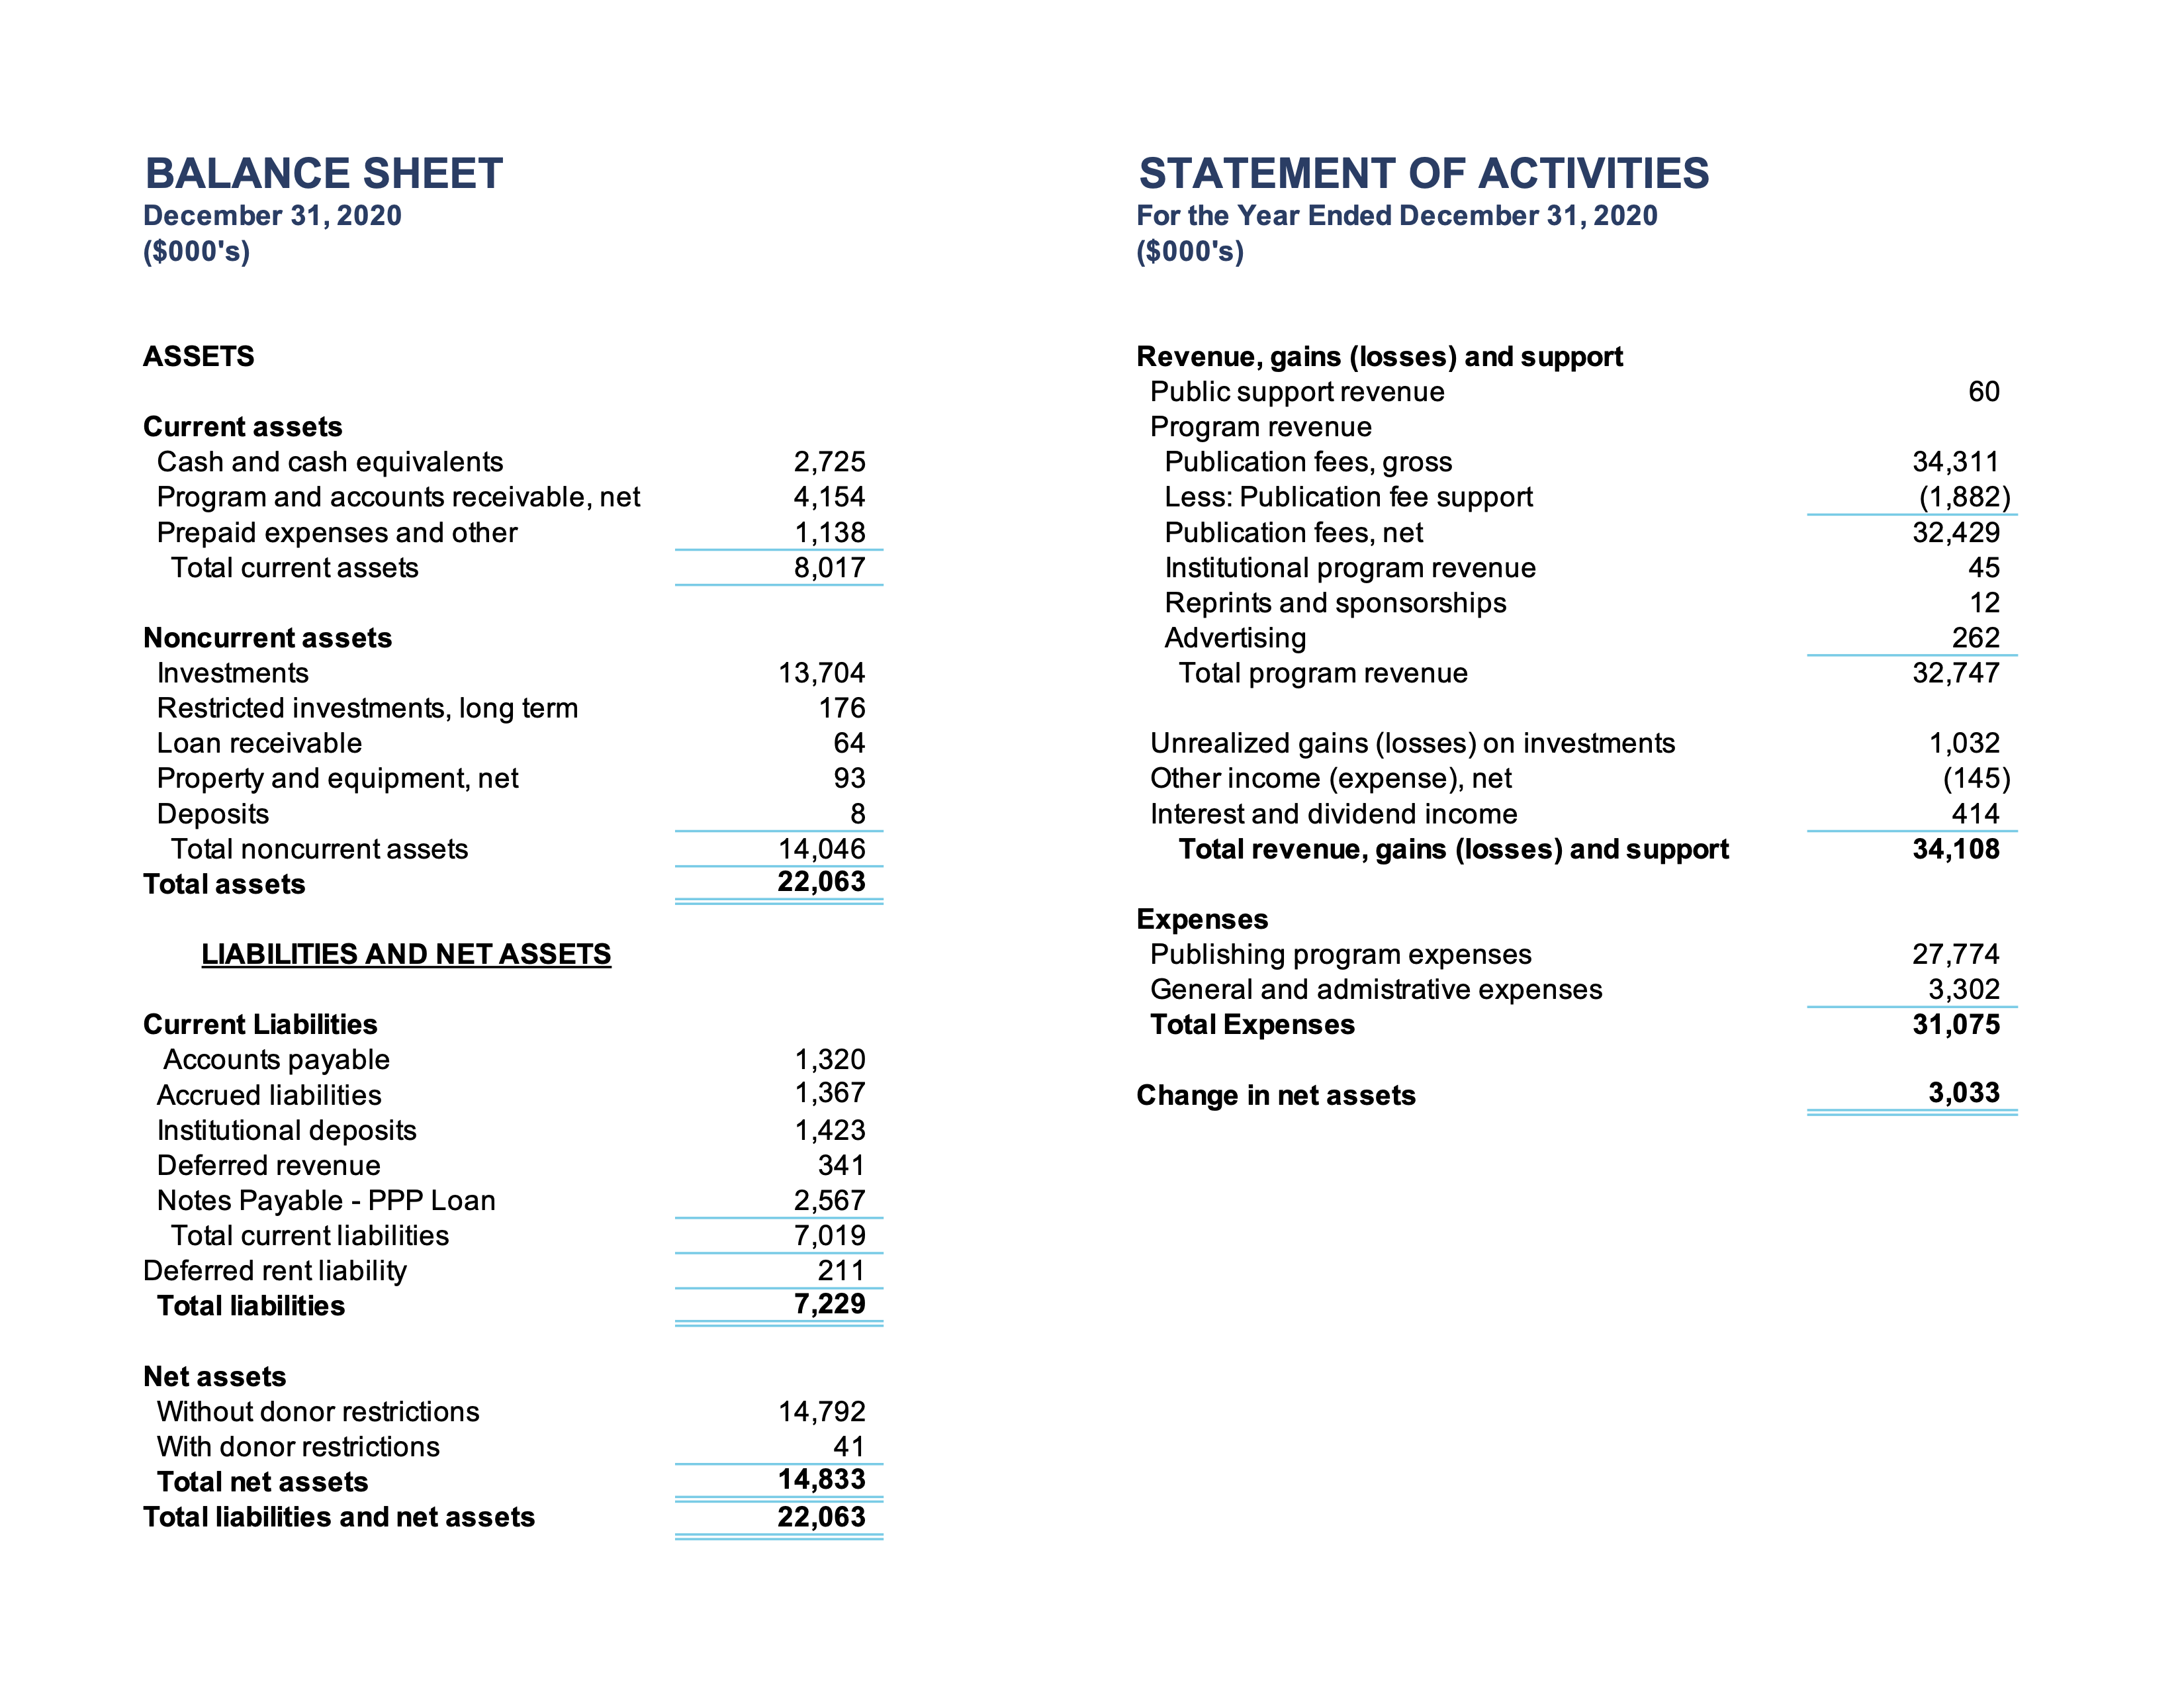 Financial Overview for 2020 including a breakdown of the Balance Sheet and Statement of Activities